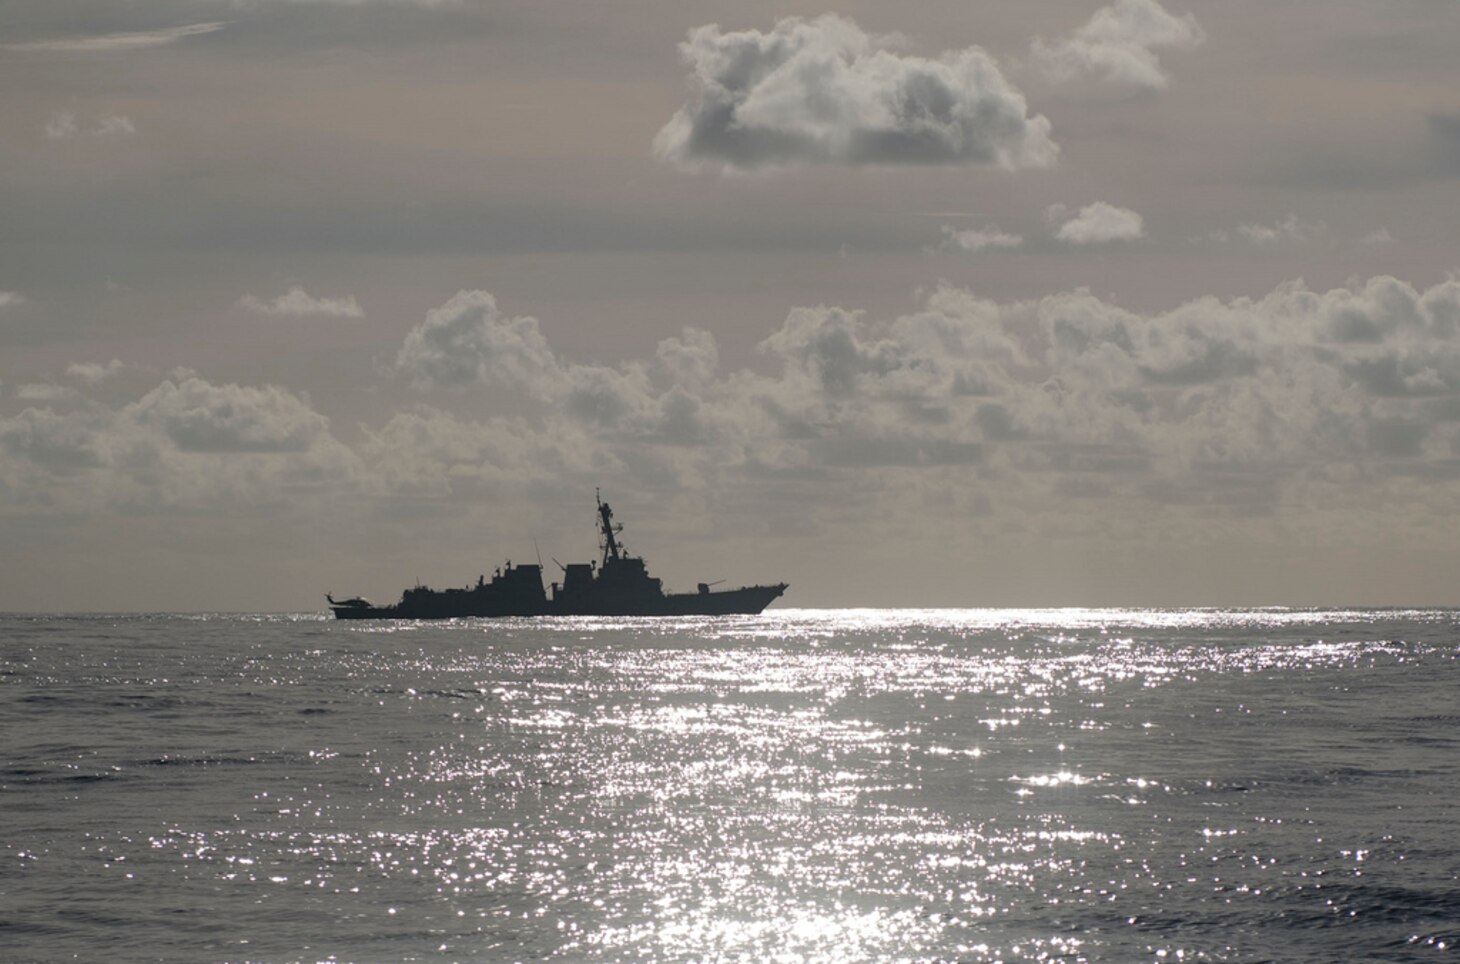 The guided-missile destroyer USS Michael Murphy (DDG 112) transits the Pacific, Feb. 7, 2018. Michael Murphy is on a regularly scheduled Western Pacific deployment with the Carl Vinson Carrier Strike Group as part of the U.S. Pacific Fleet-led initiative to extend the command and control functions of the U.S. 3rd Fleet in the Indo-Asia-Pacific region. Navy aircraft carrier strike groups have patrolled the Indo-Asia-Pacific regularly and routinely for more than 70 years. 